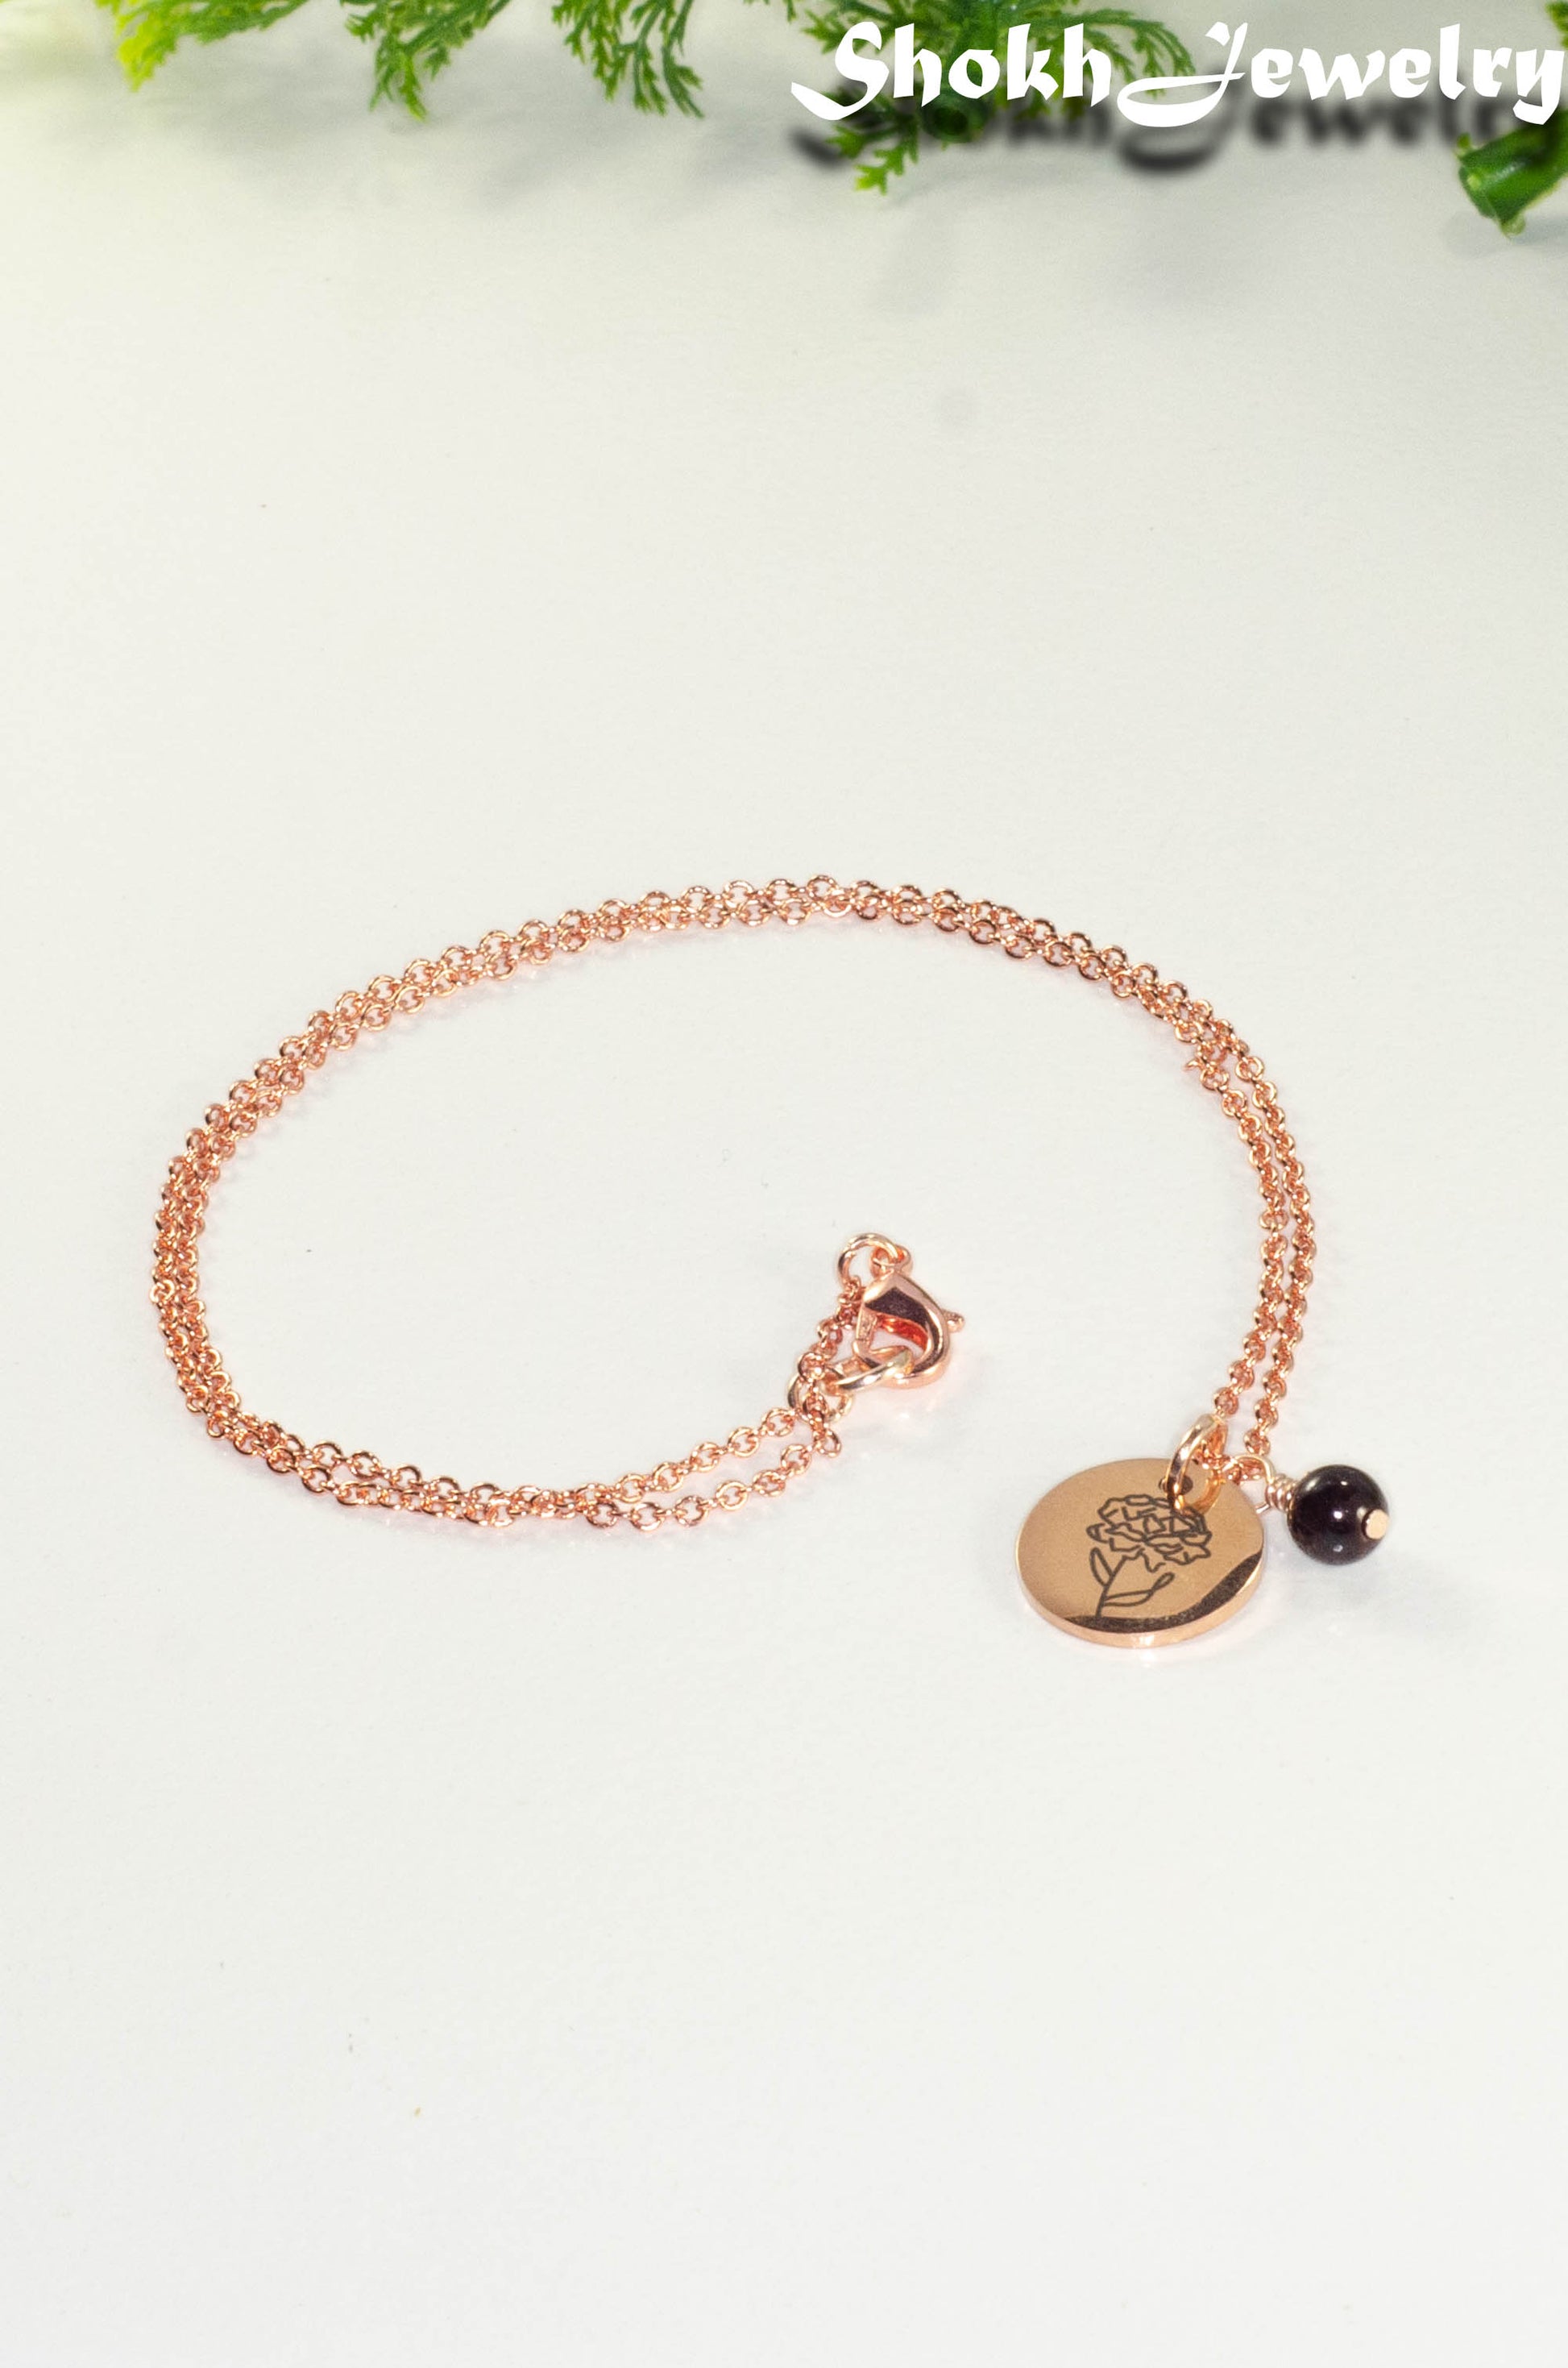 Rose Gold Plated January Birth Flower Necklace with Garnet Birthstone Pendant.